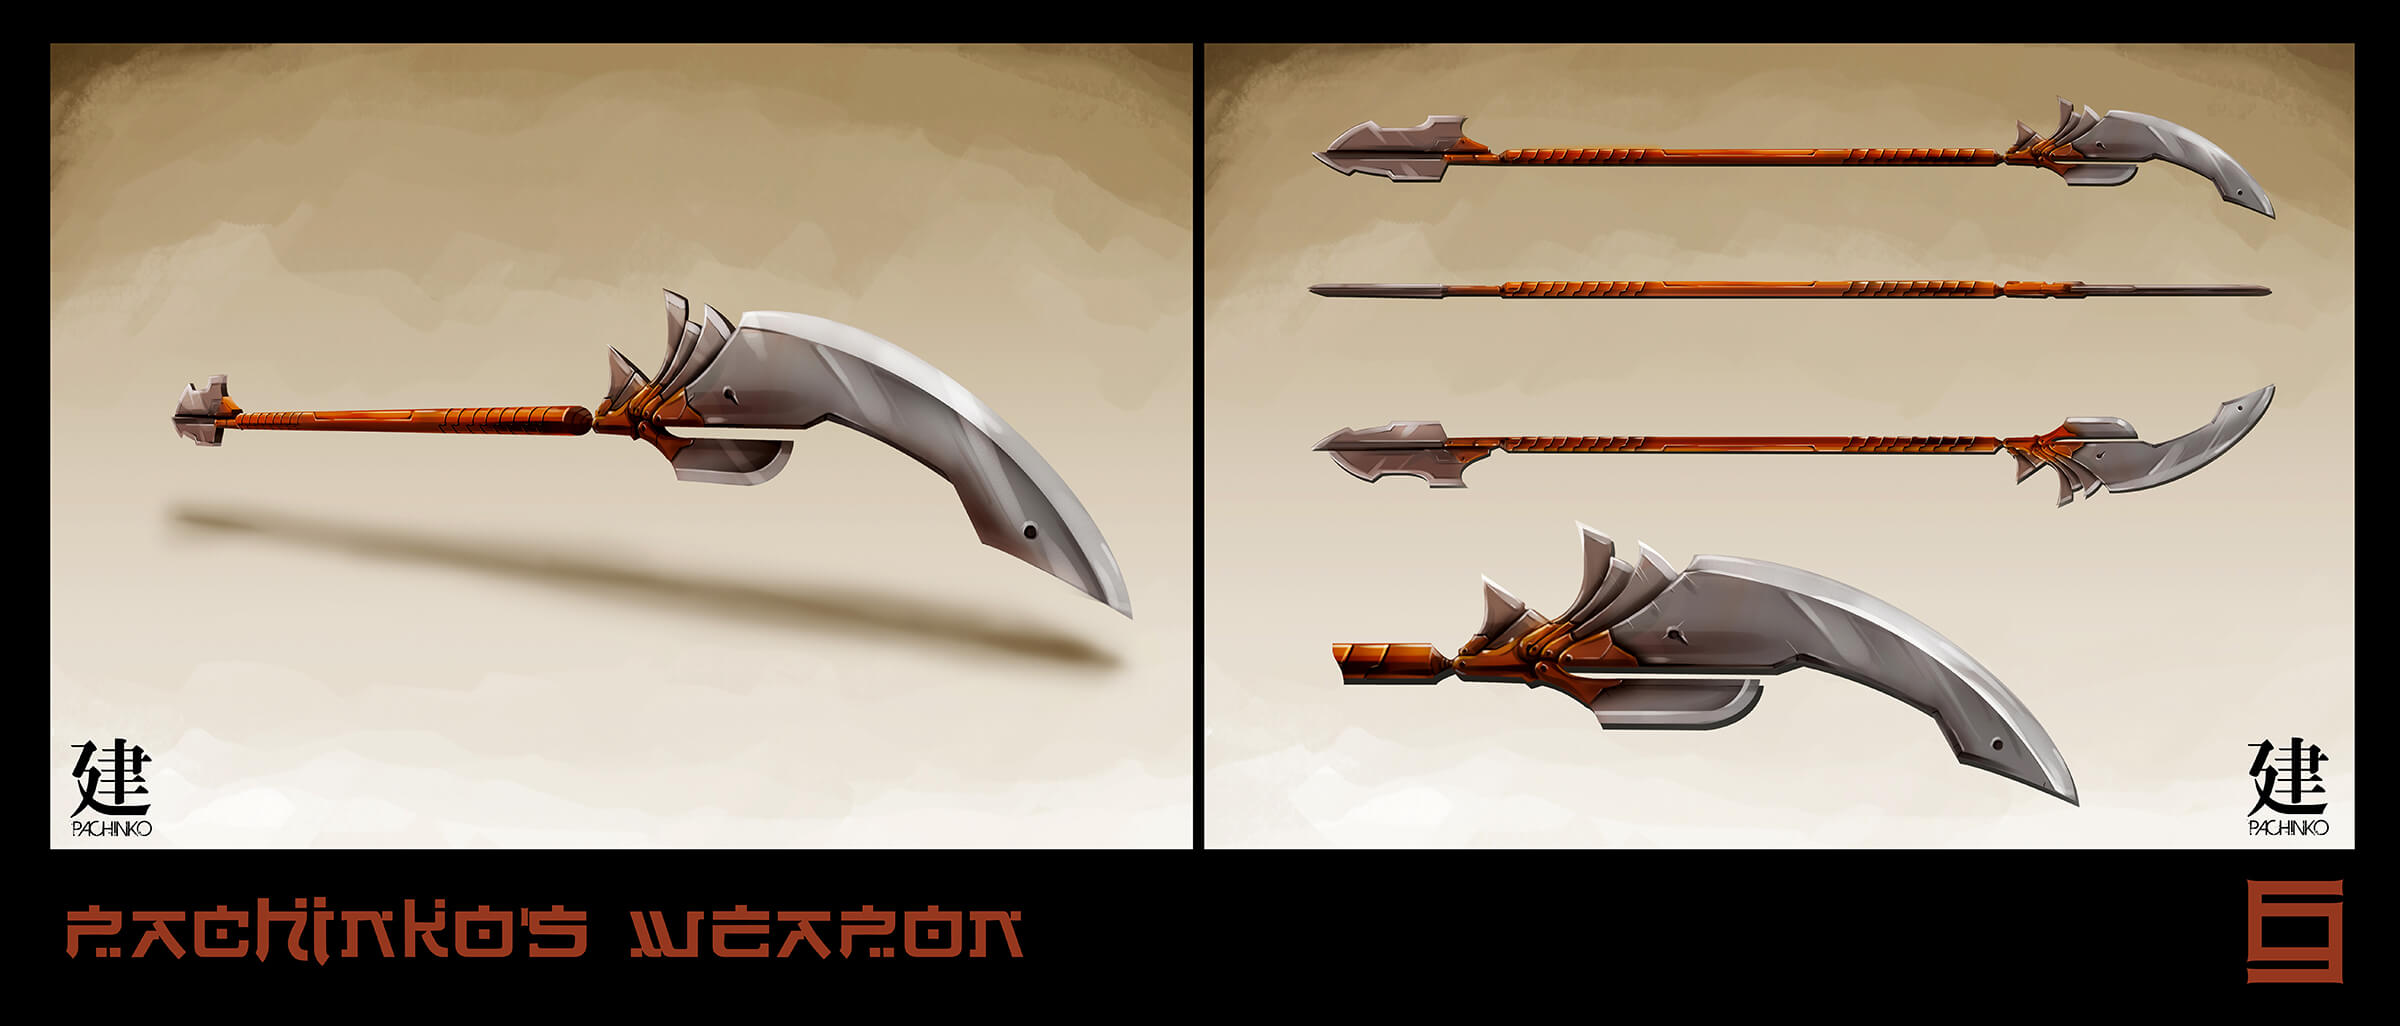 Concept art of a long weapon, bladed at both ends of its orange shaft, seen from different angles